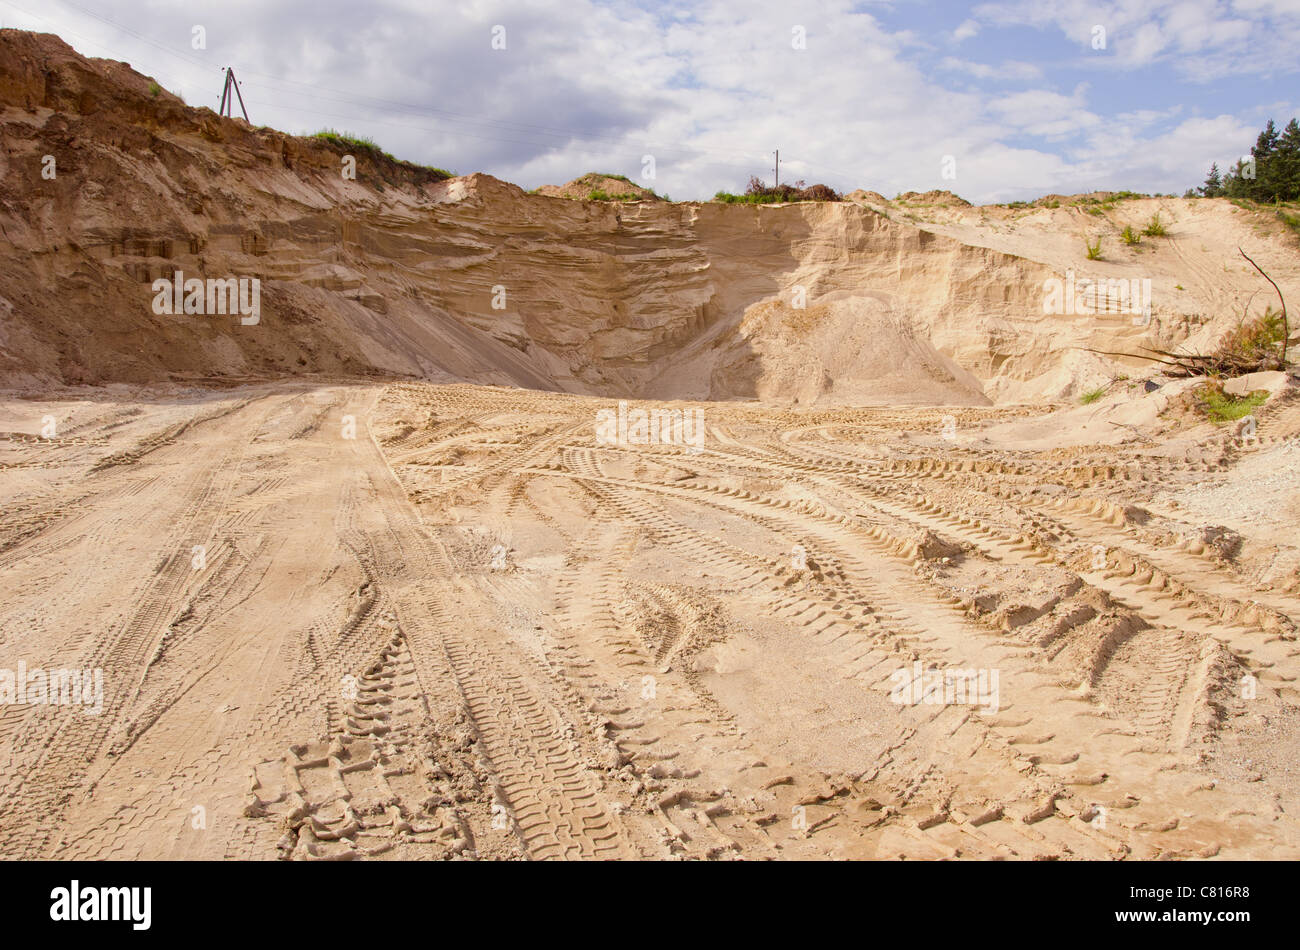 Sand pit. Sand special for construction. Pit full of fine sand and truck tracks. Stock Photo